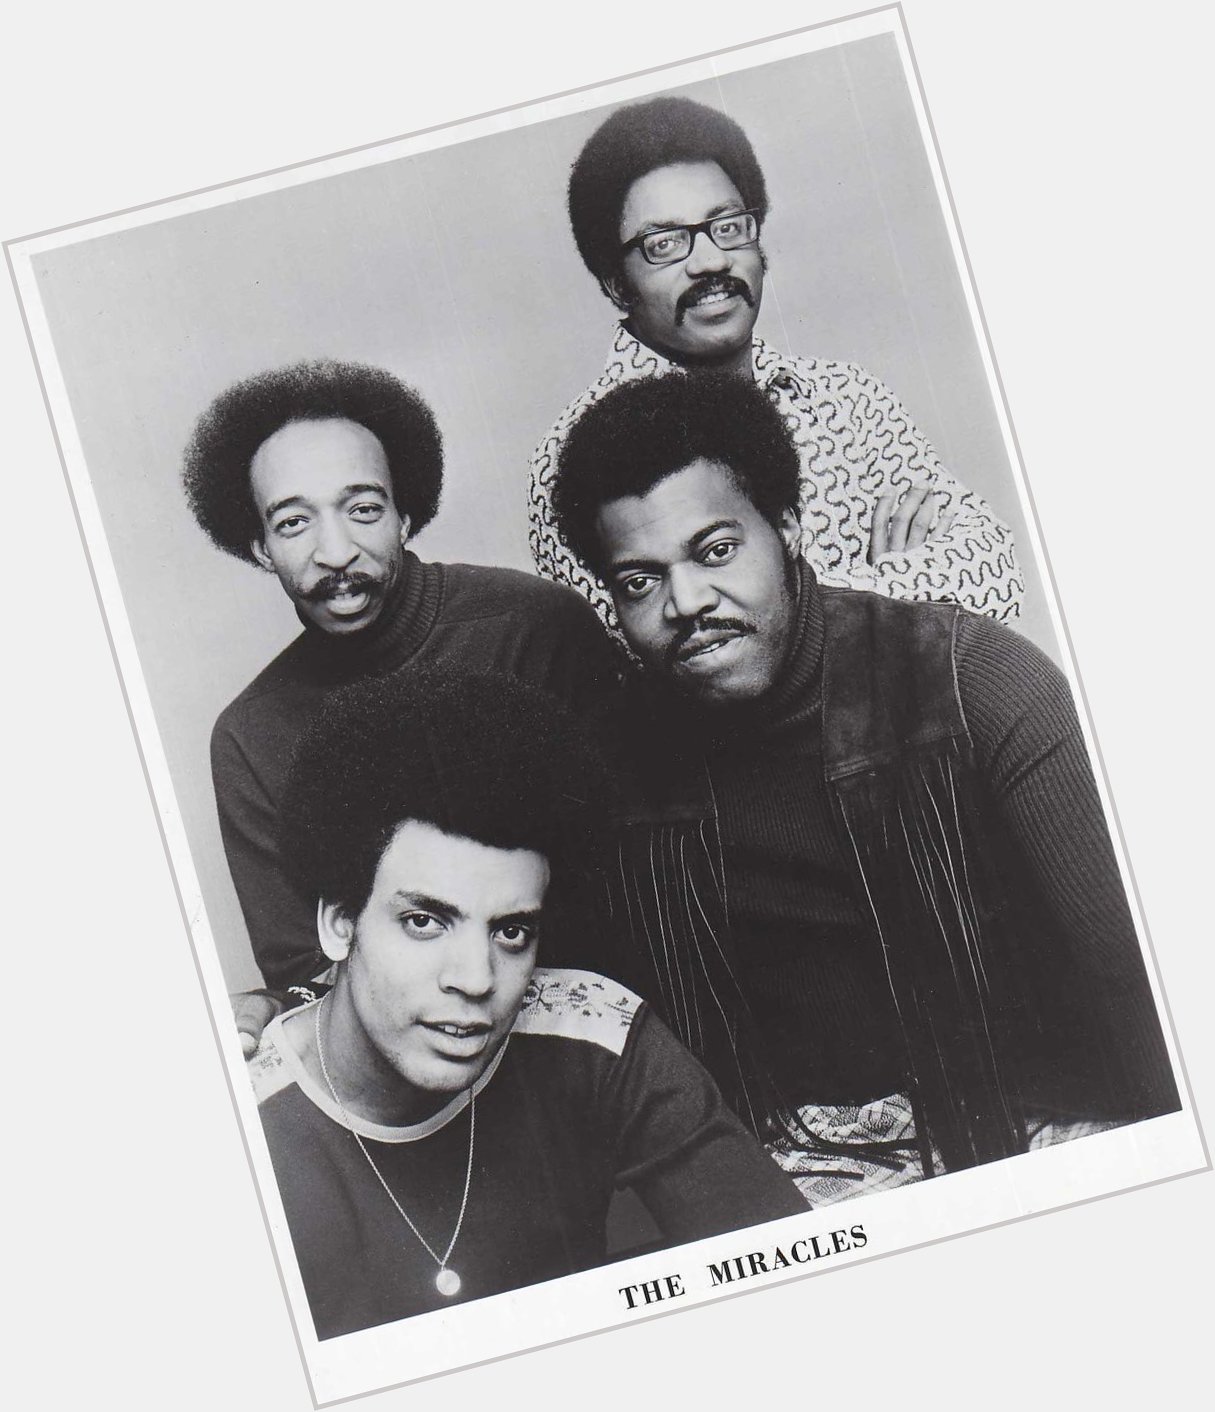 Happy Birthday Billy Griffin (August 15, 1950) singer of The Miracles
 